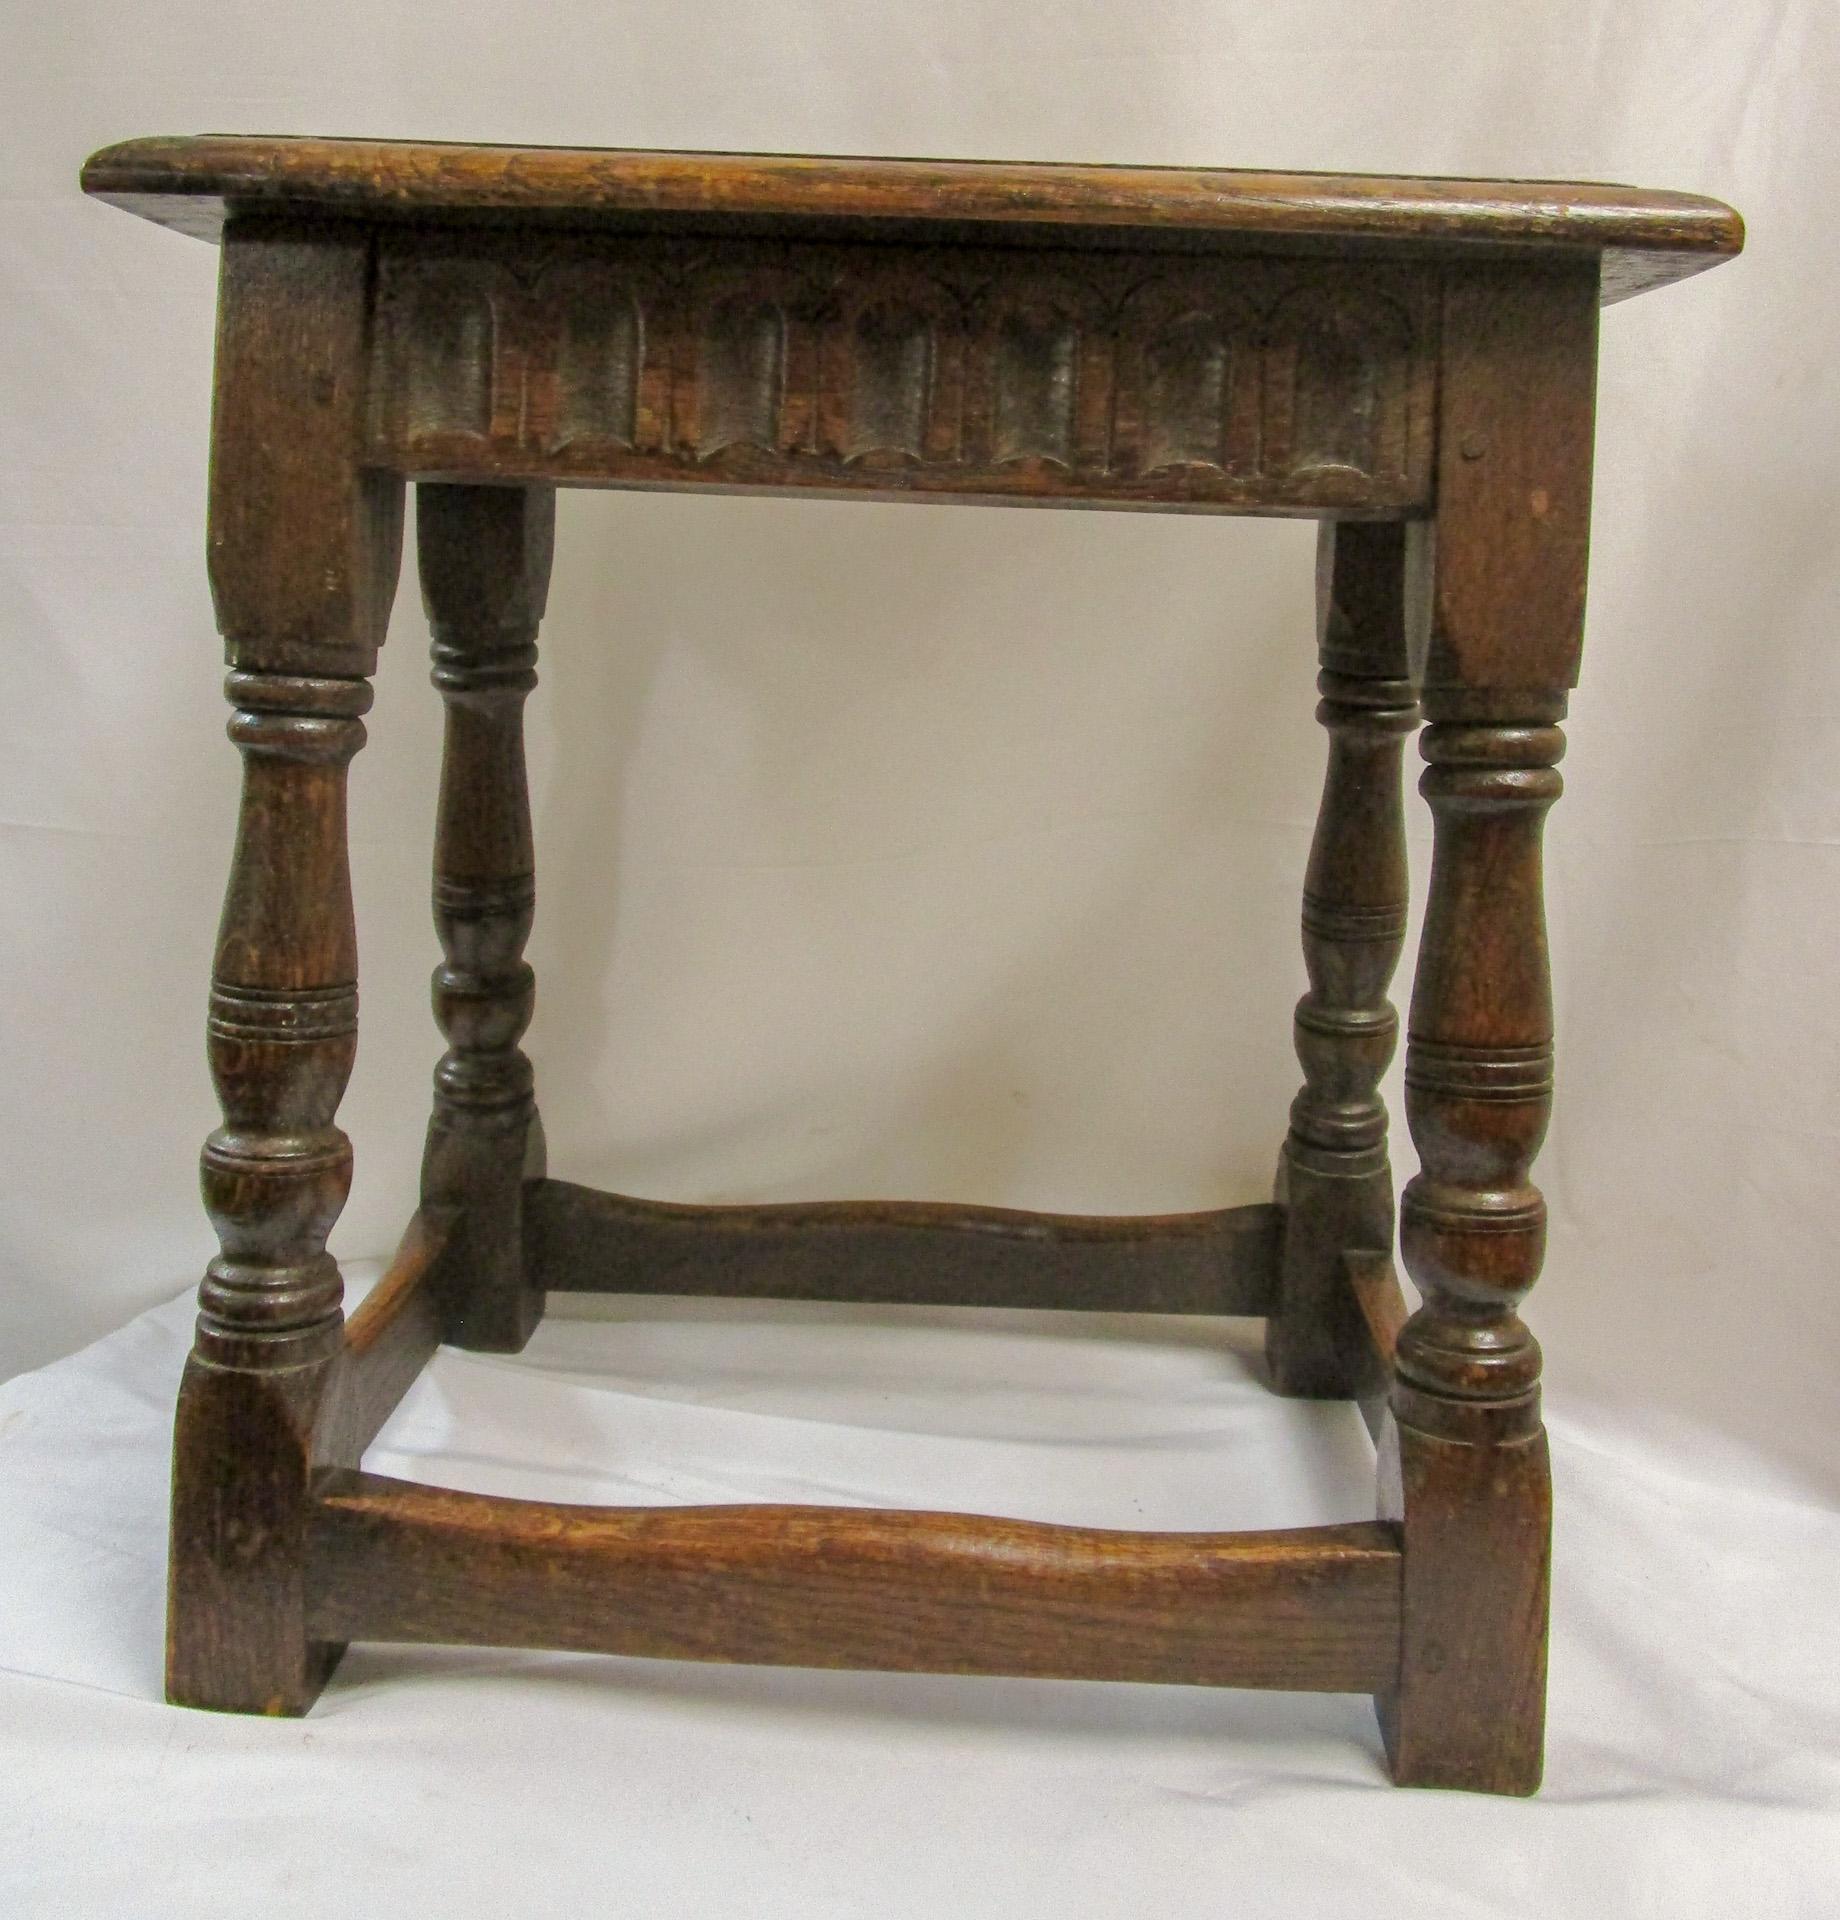 Not many pieces of this age have stood the test of time. This very early English joint stool is handcrafted of oak, note the rough burls on the top of the piece.  It is of pegged construction and features block and turned legs. Primitive but